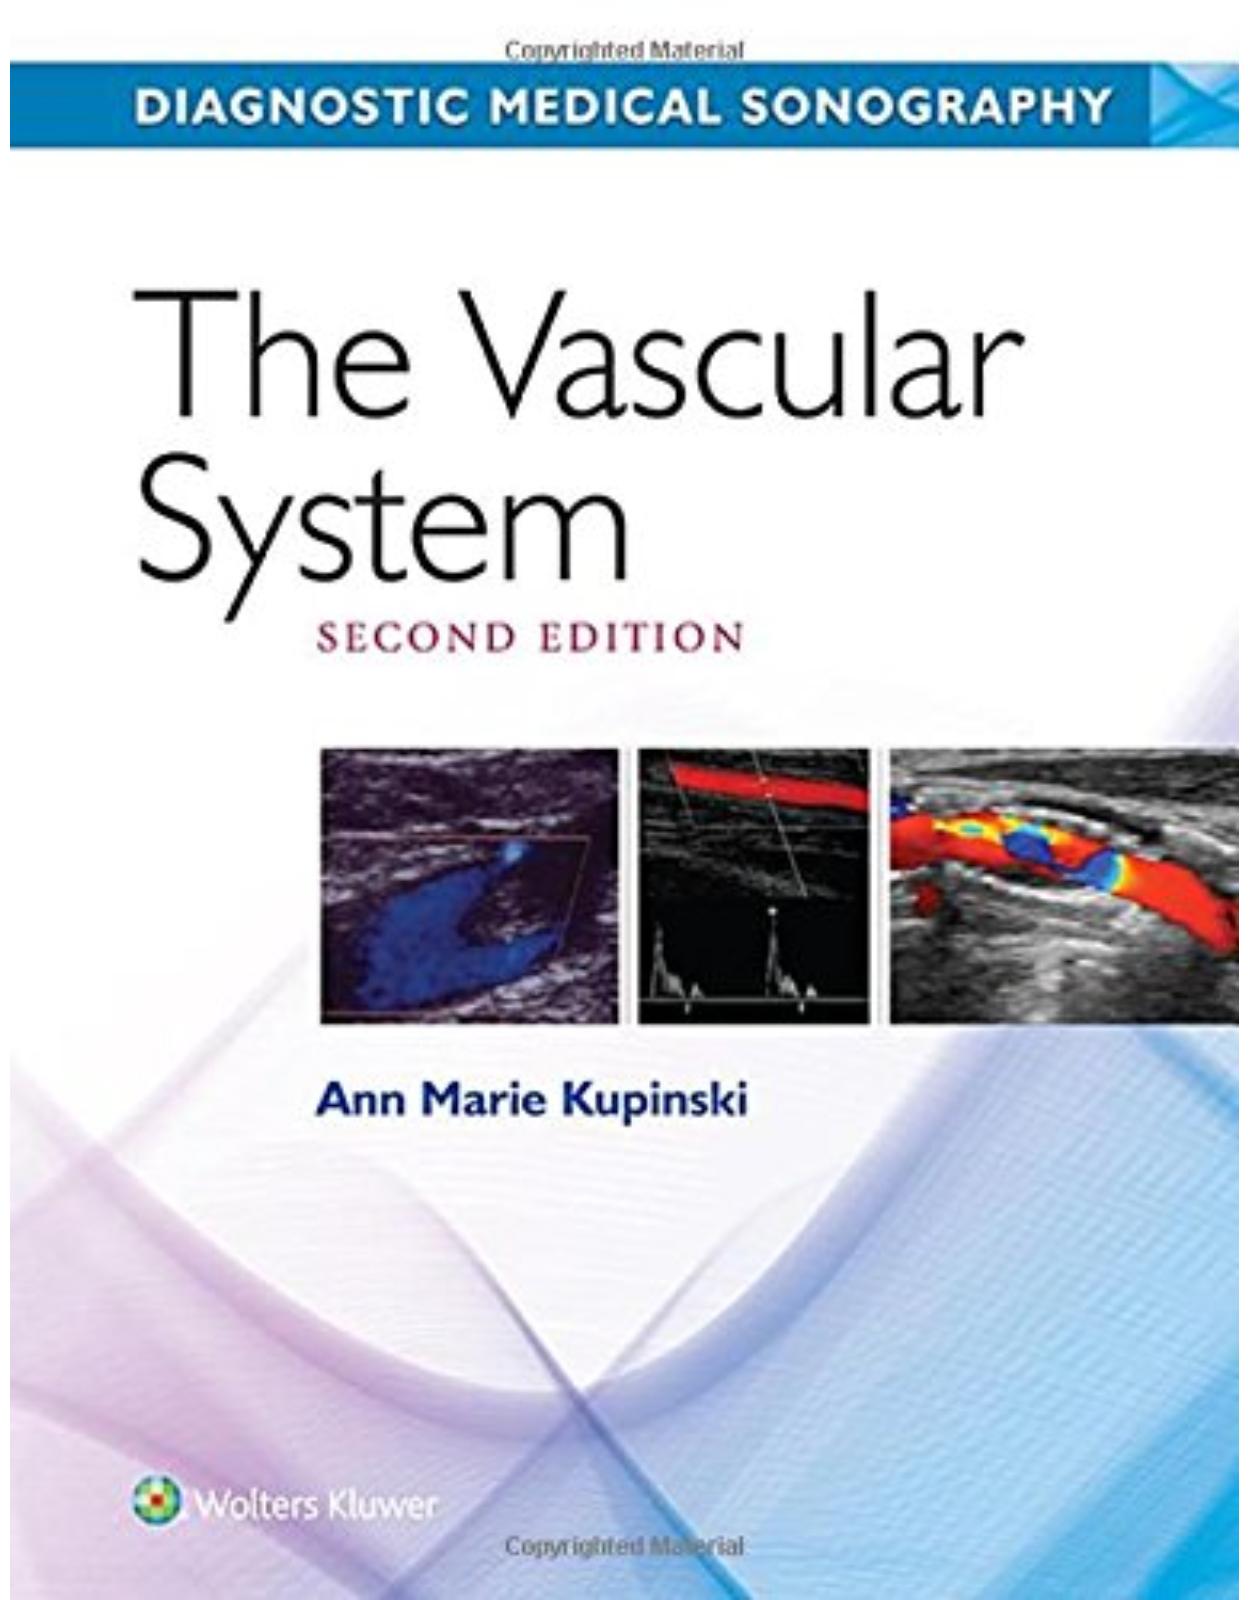 The Vascular System (Diagnostic Medical Sonography Series)